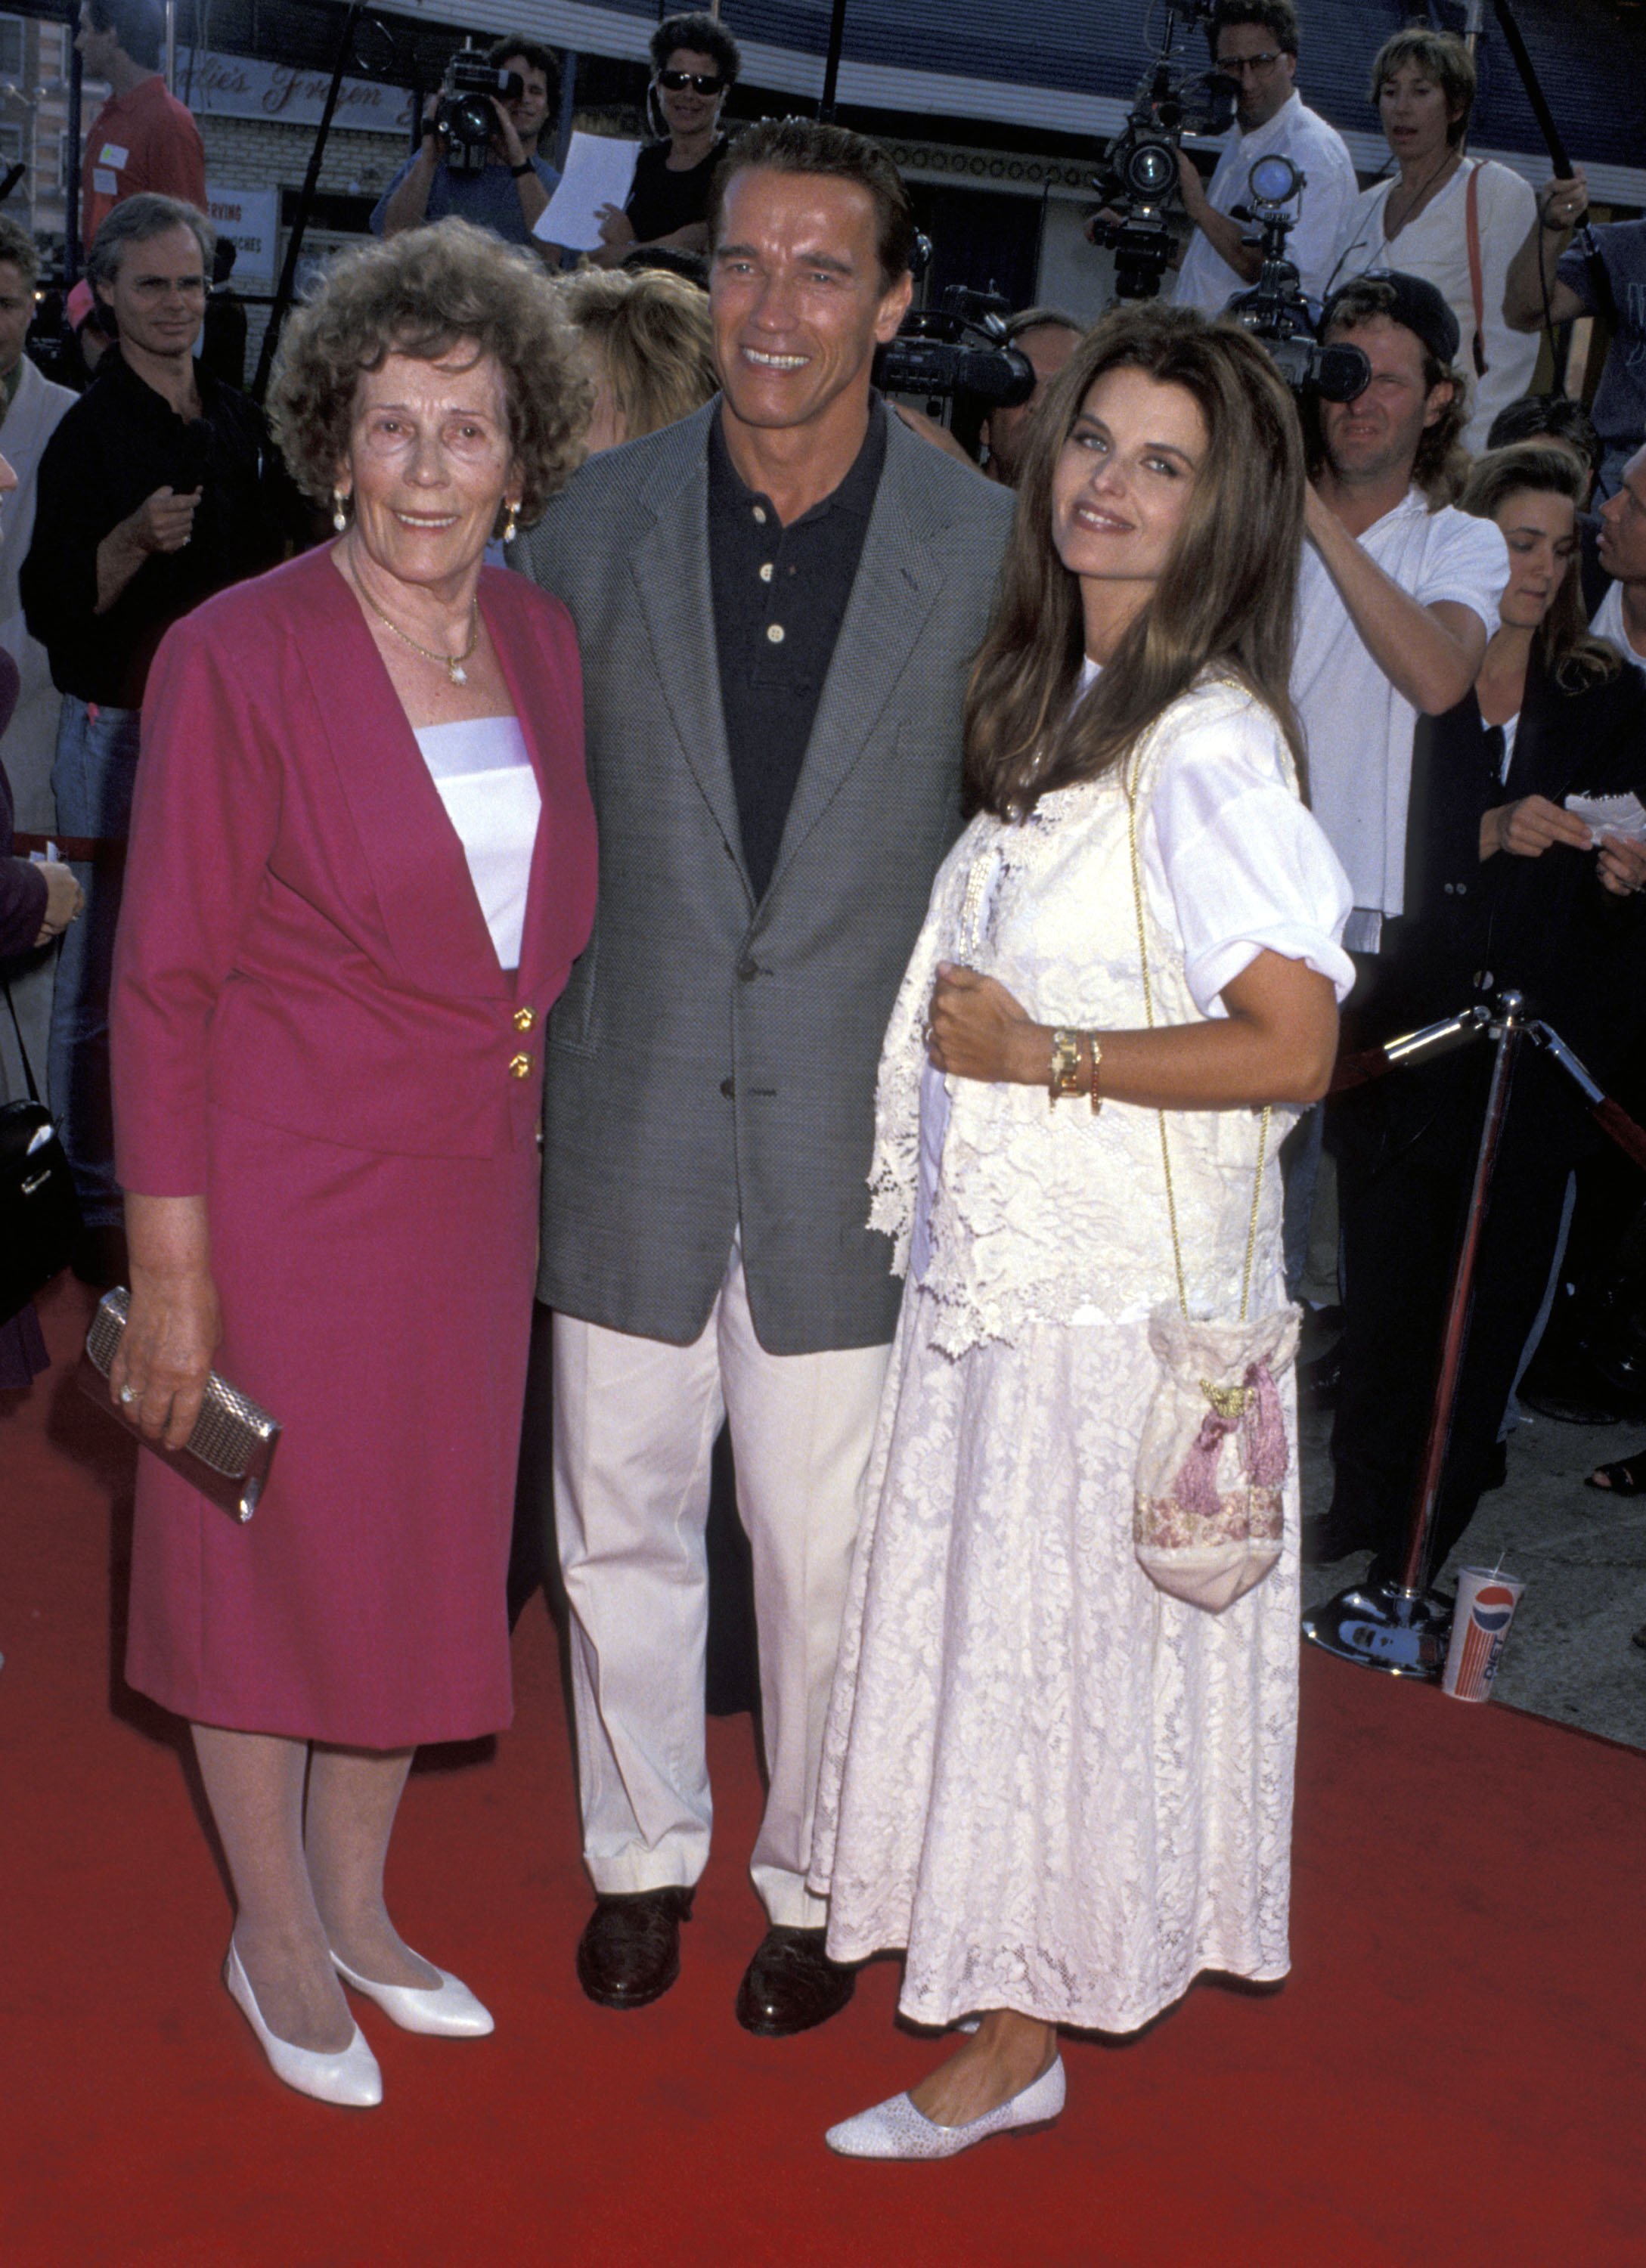 Arnold Schwarzenegger, Aurelia Schwarzenegger, and Maria Shriver at the world premiere of "Last Action Hero" in Westwood, California, on June 13, 1993 | Source: Getty Images